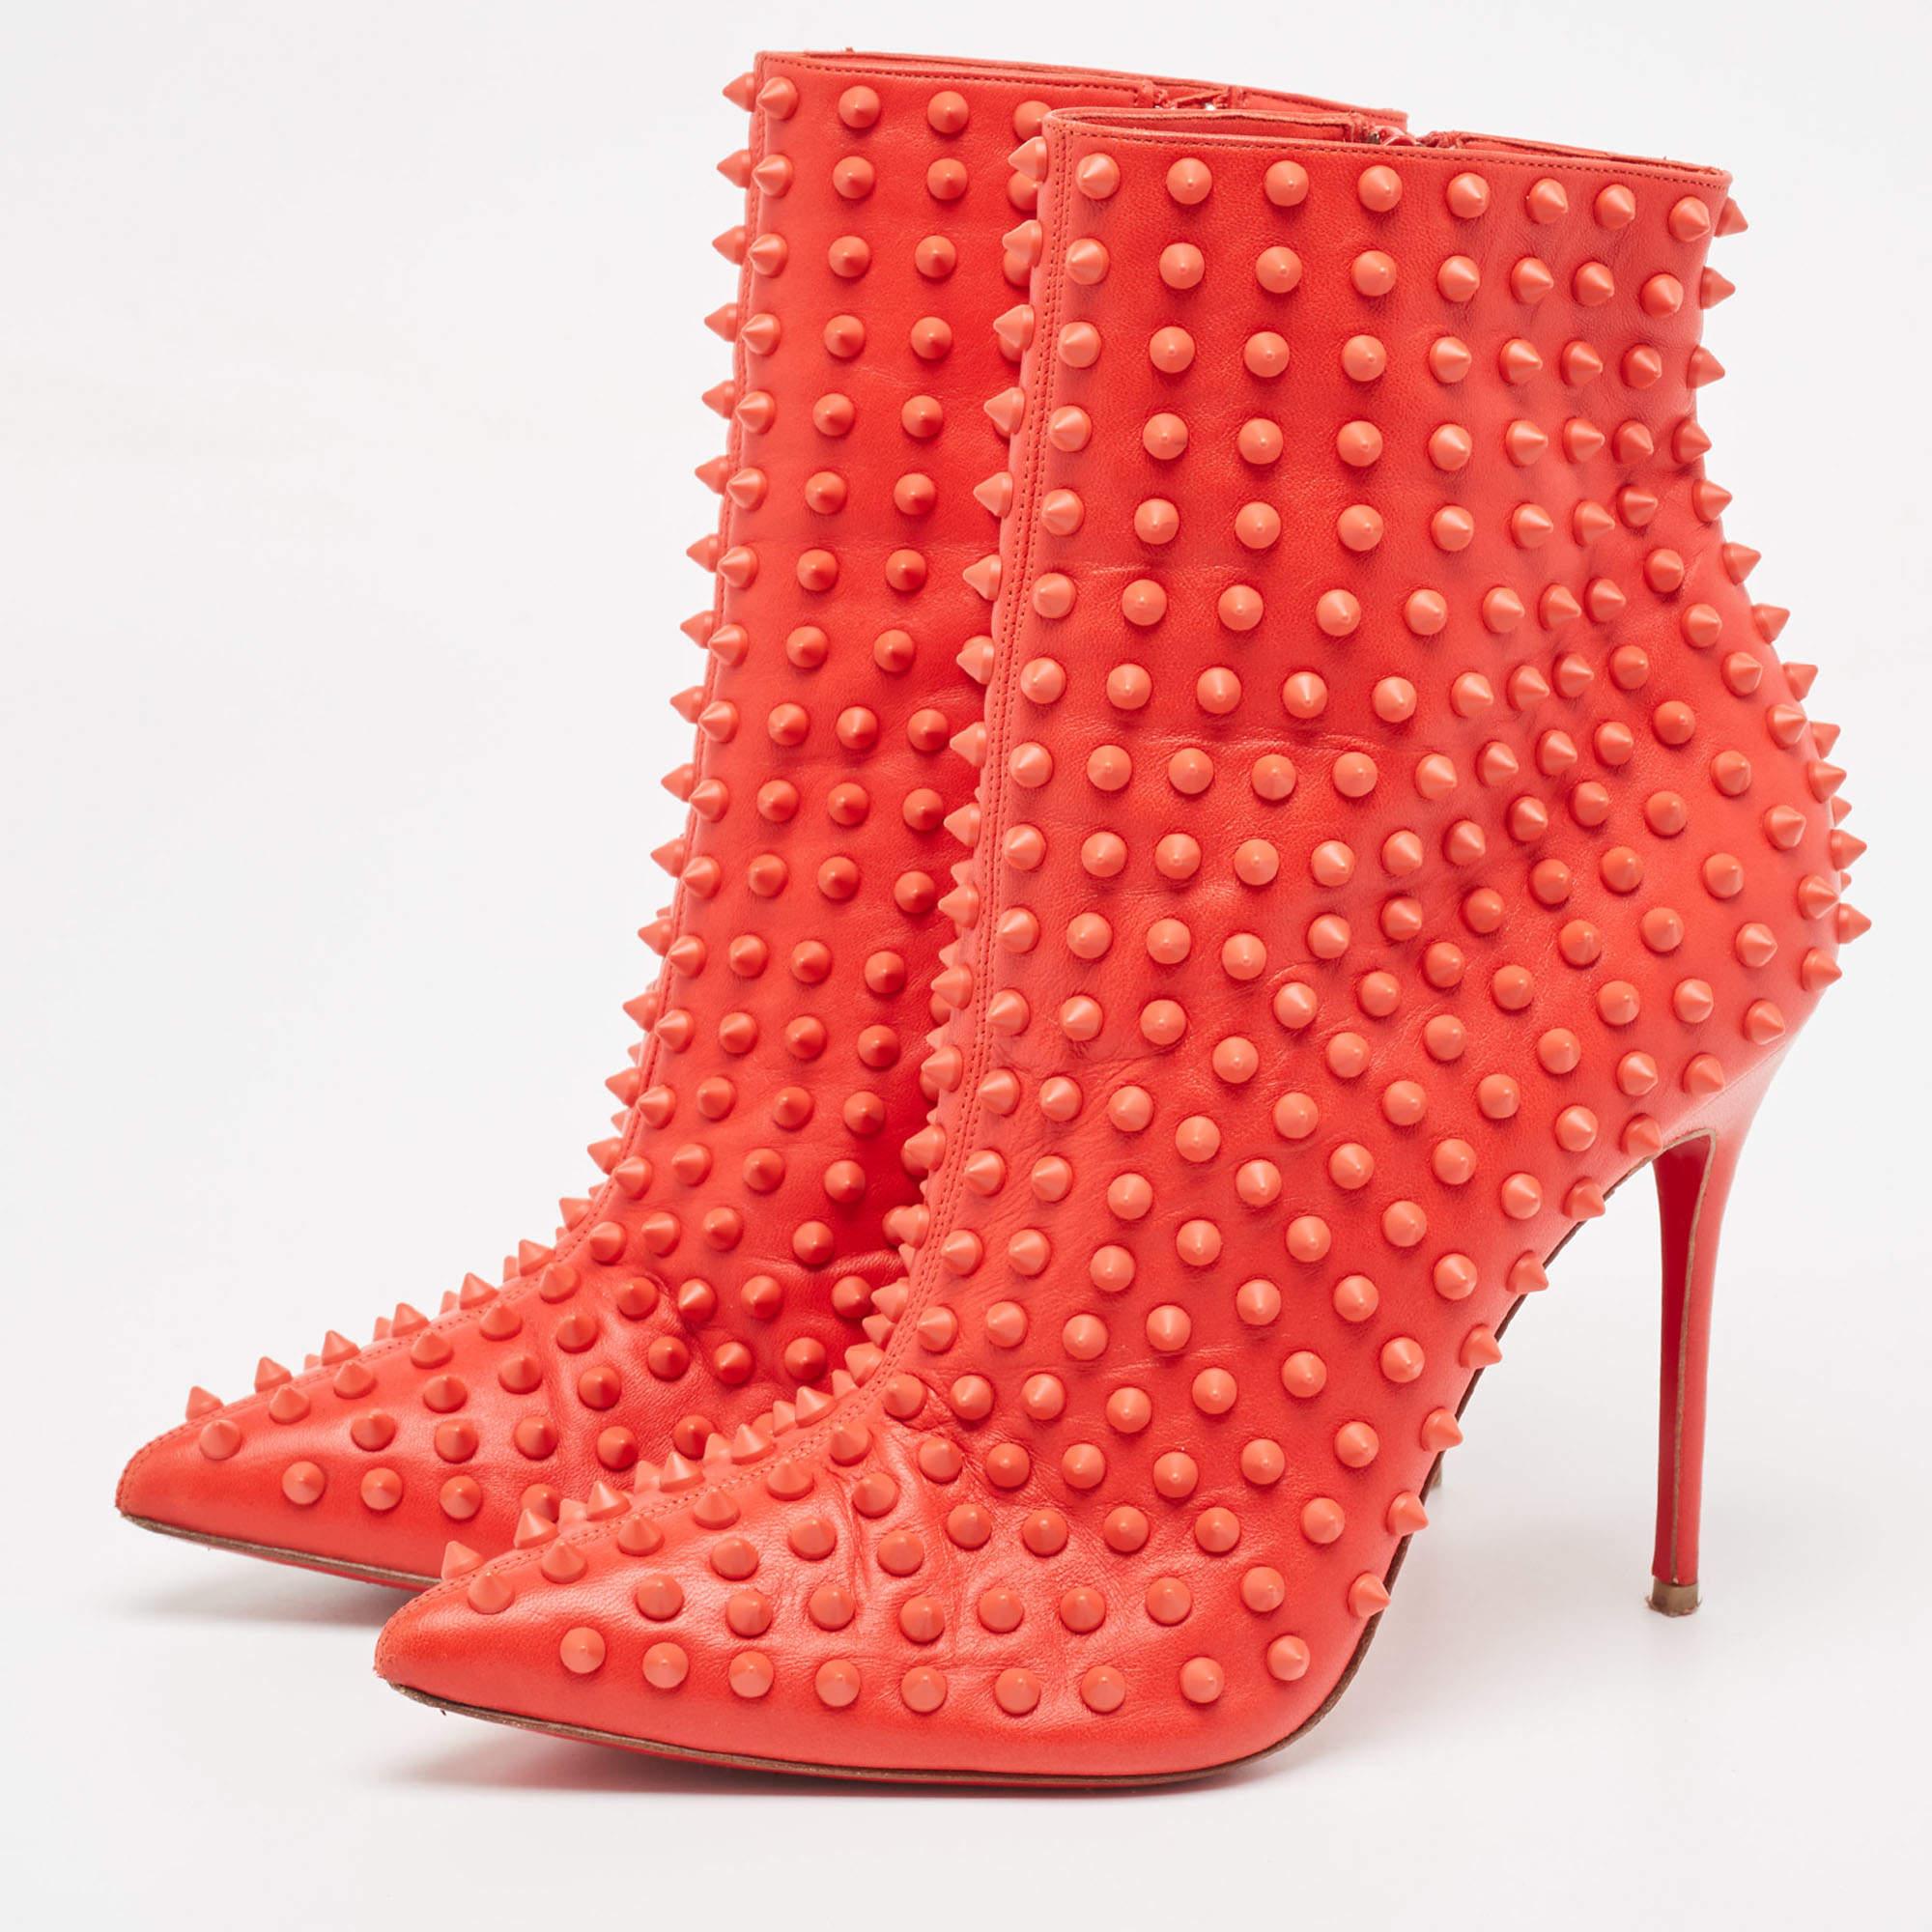 Women's Christian Louboutin Red Leather Studded Ankle Boots Size 39 For Sale